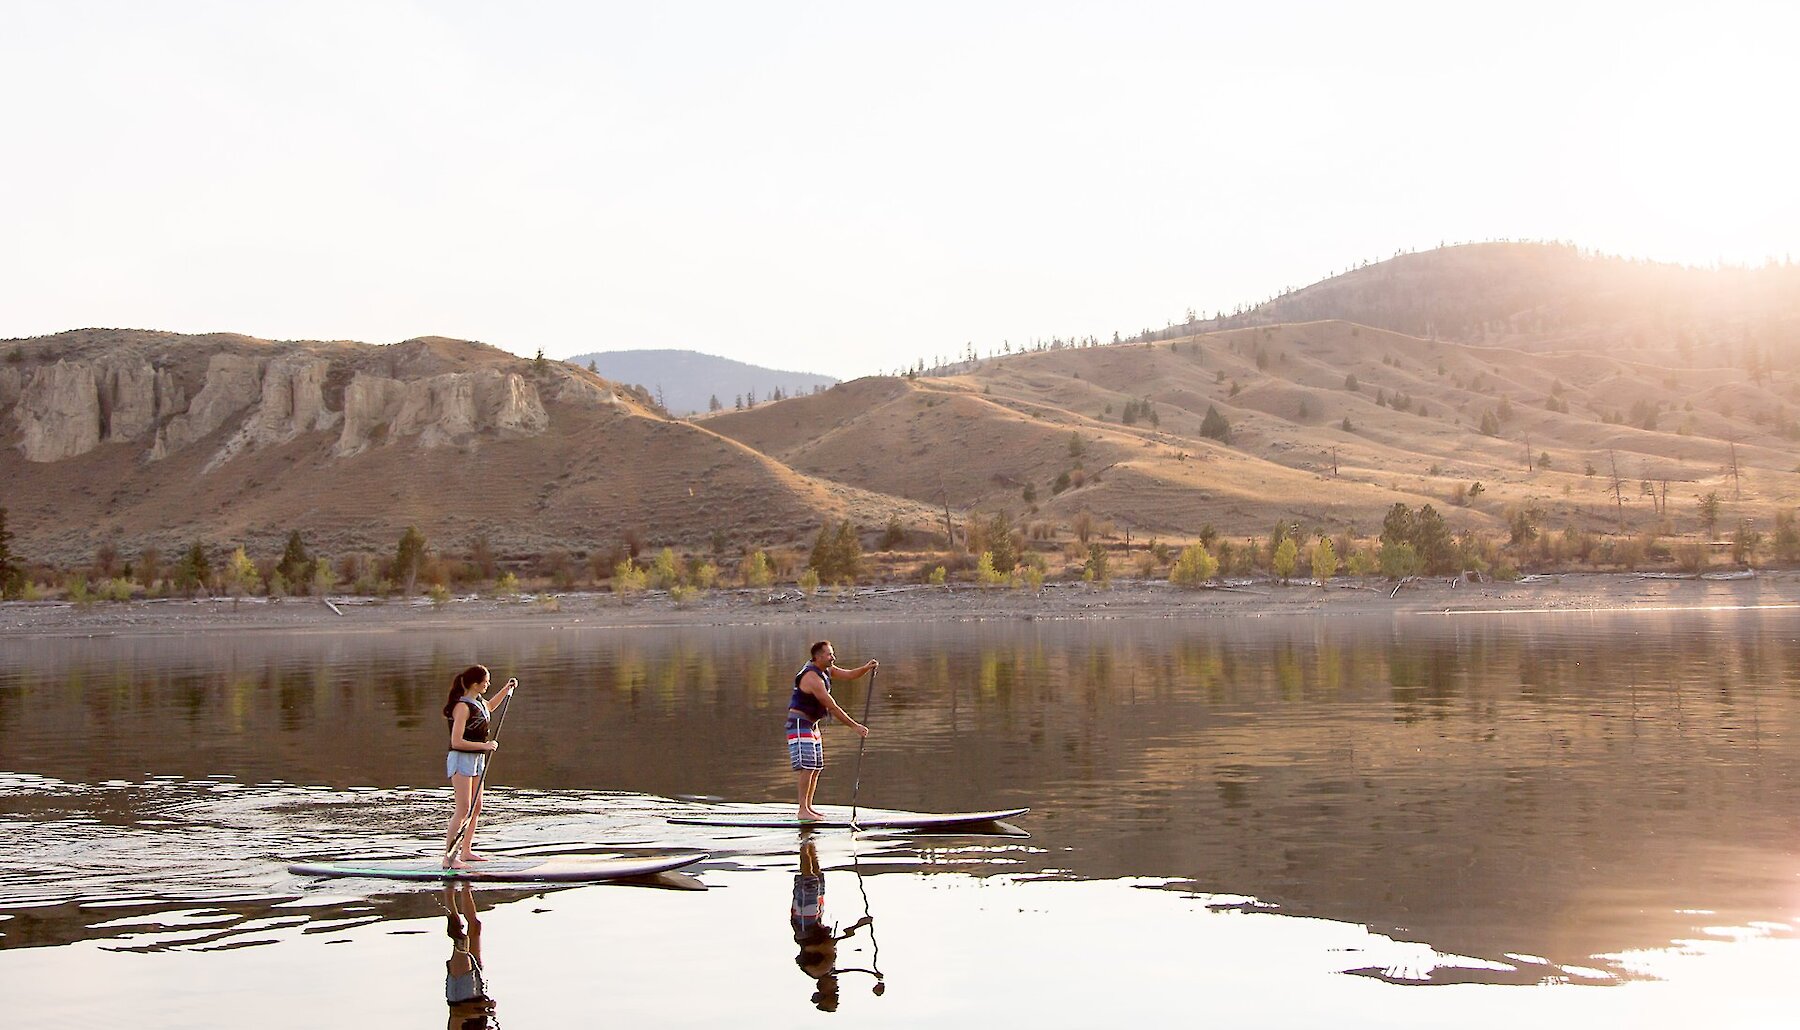 Two paddleboarders on Kamloops Lake surrounded by the natural beauty of the BC mountains in the background.